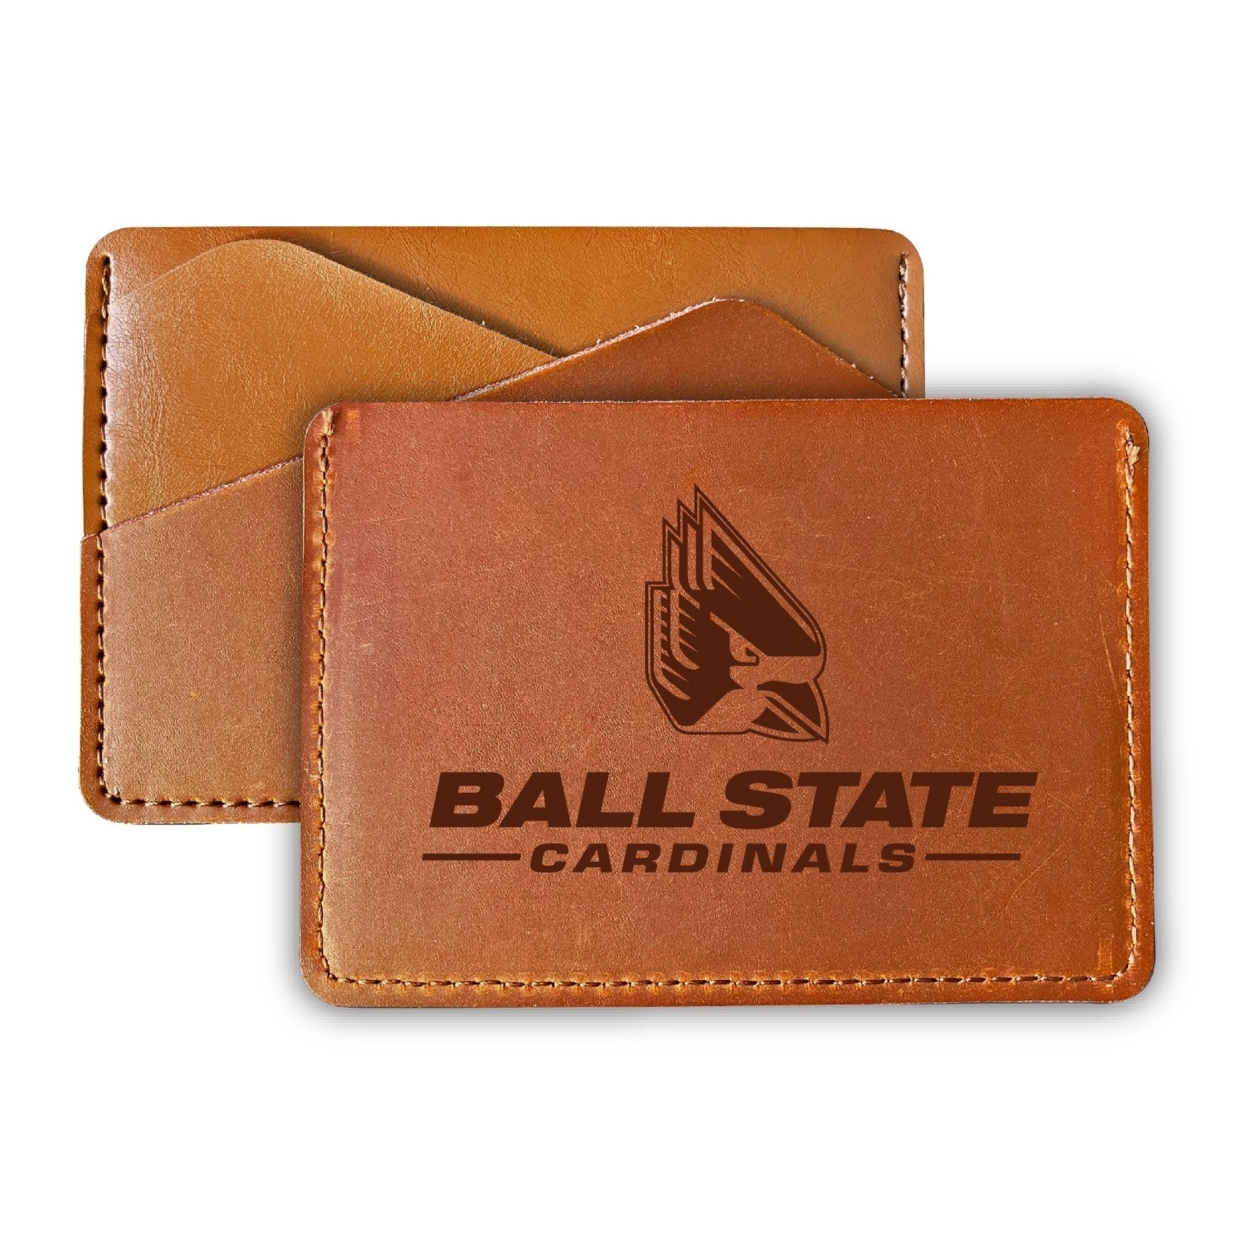 Ball State University College Leather Card Holder Wallet